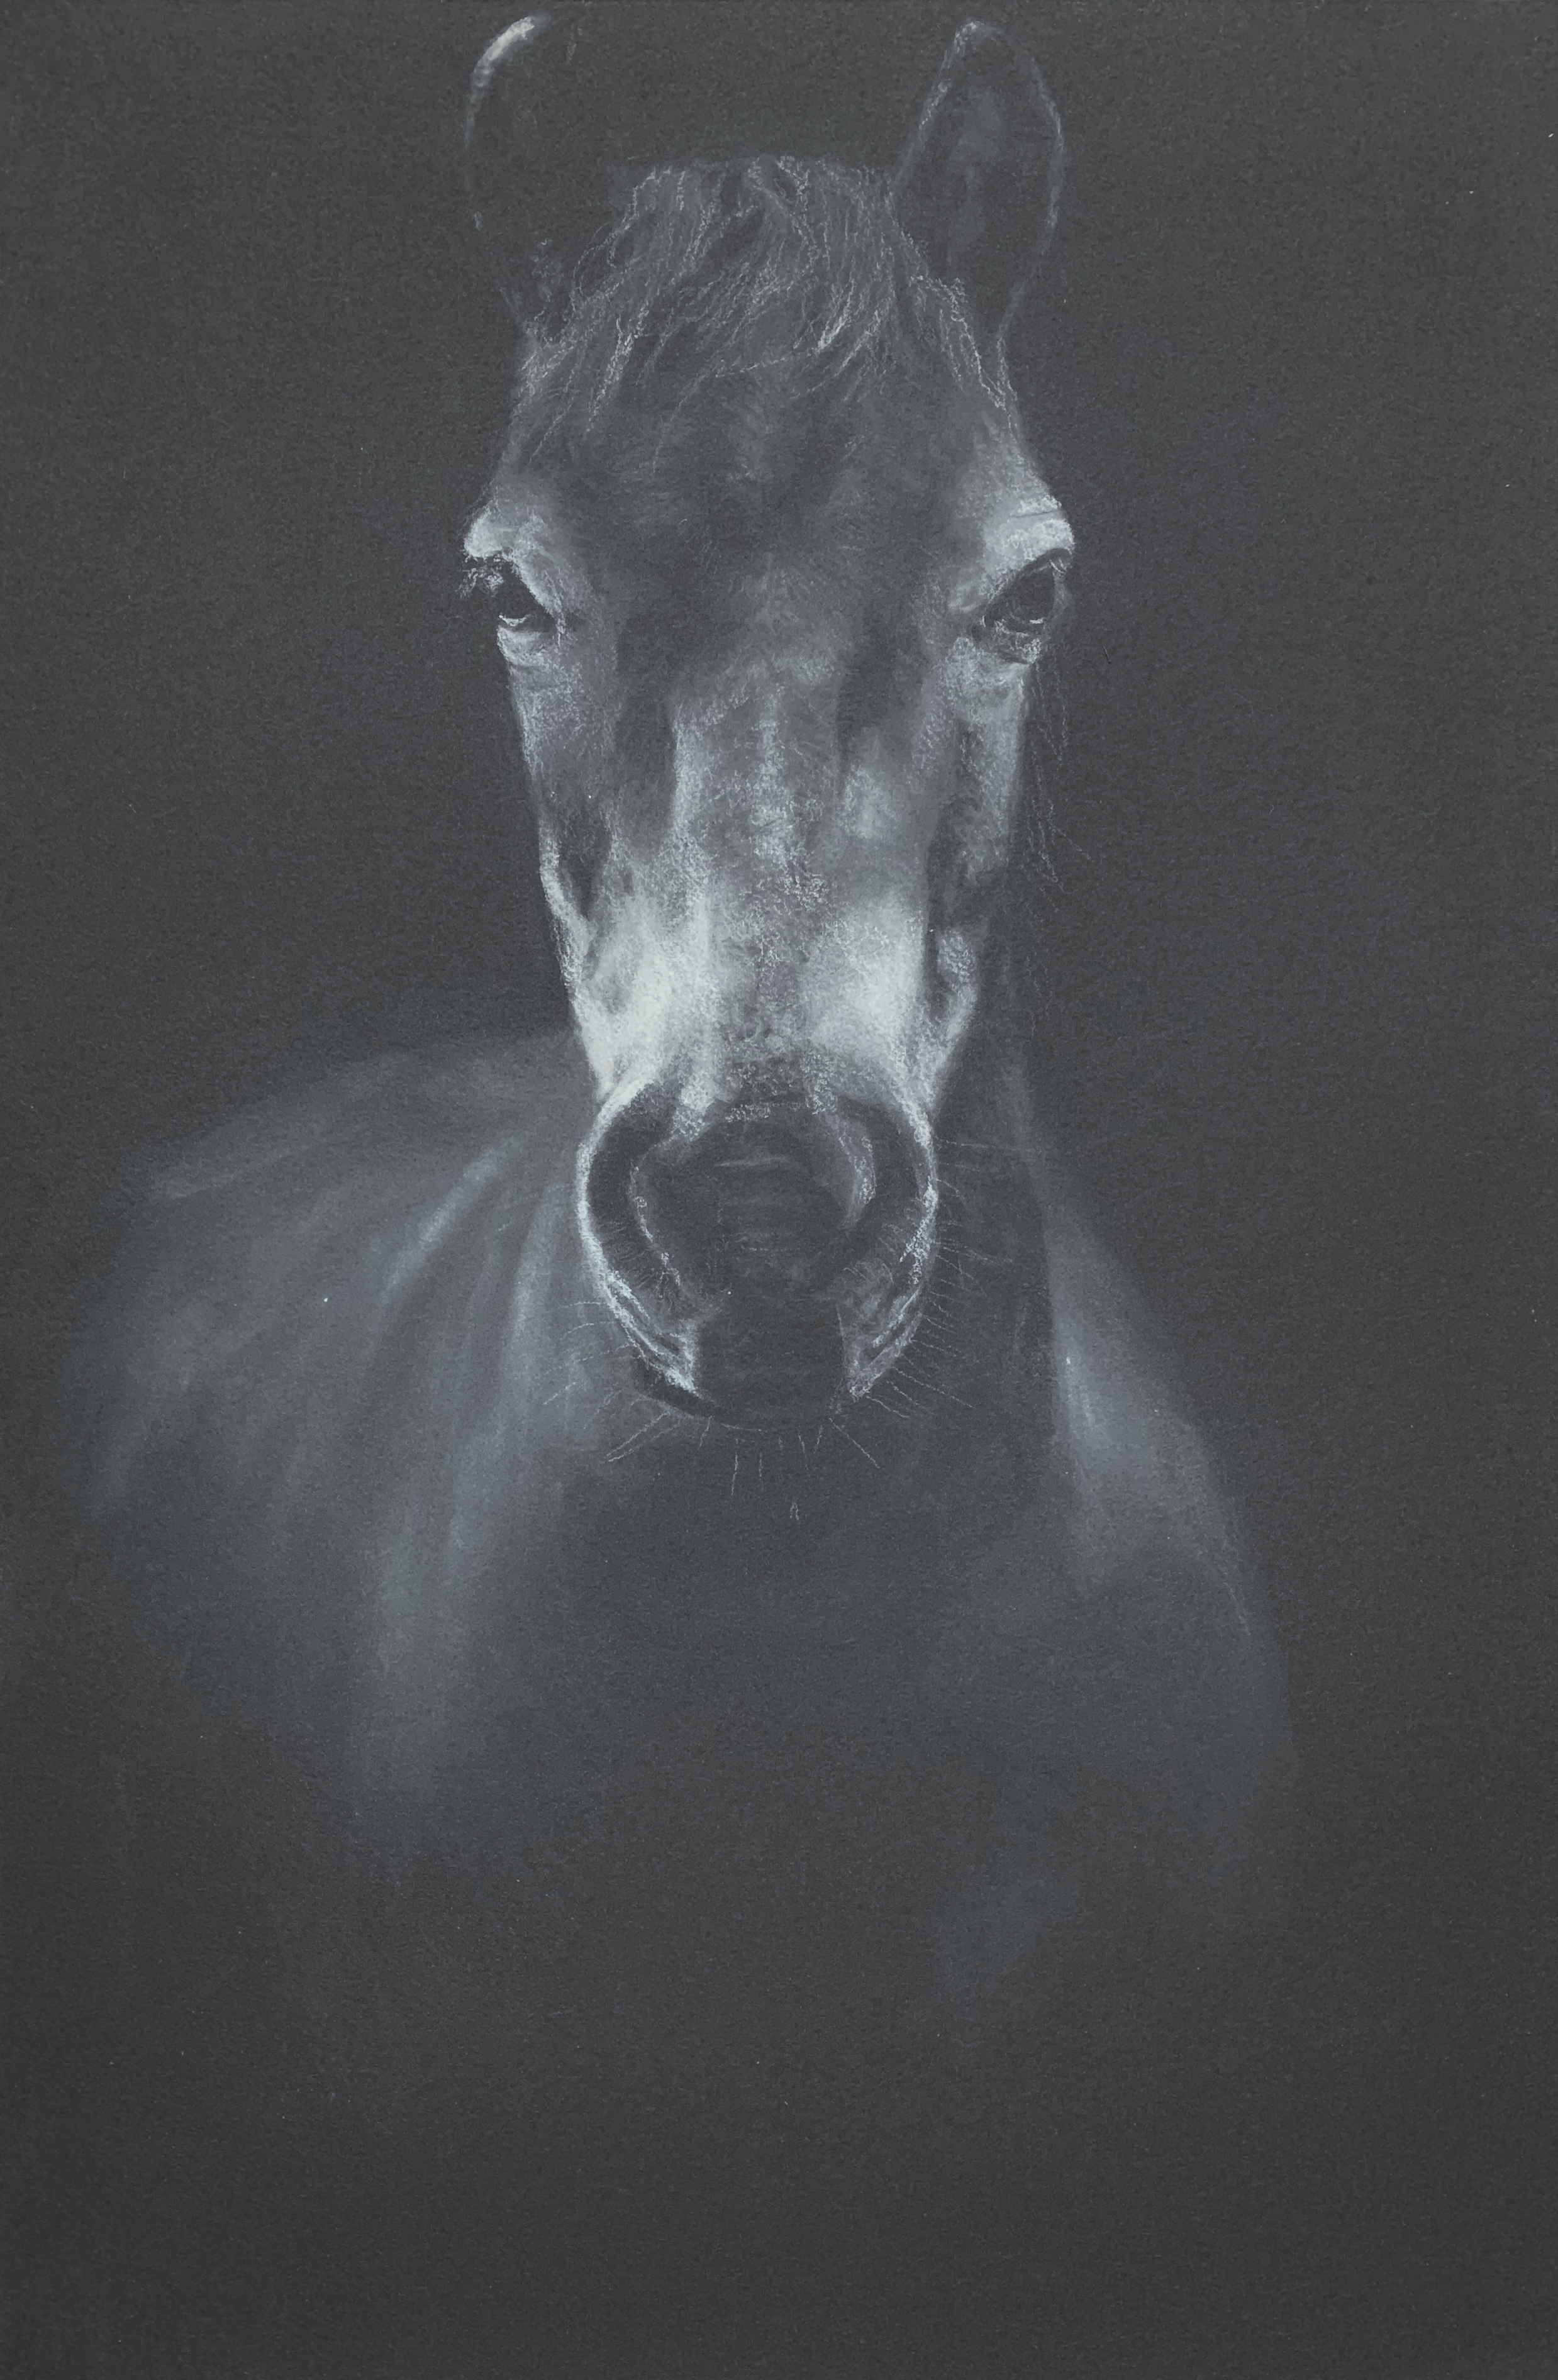   Equine    chalk on paper  22x15  SOLD 